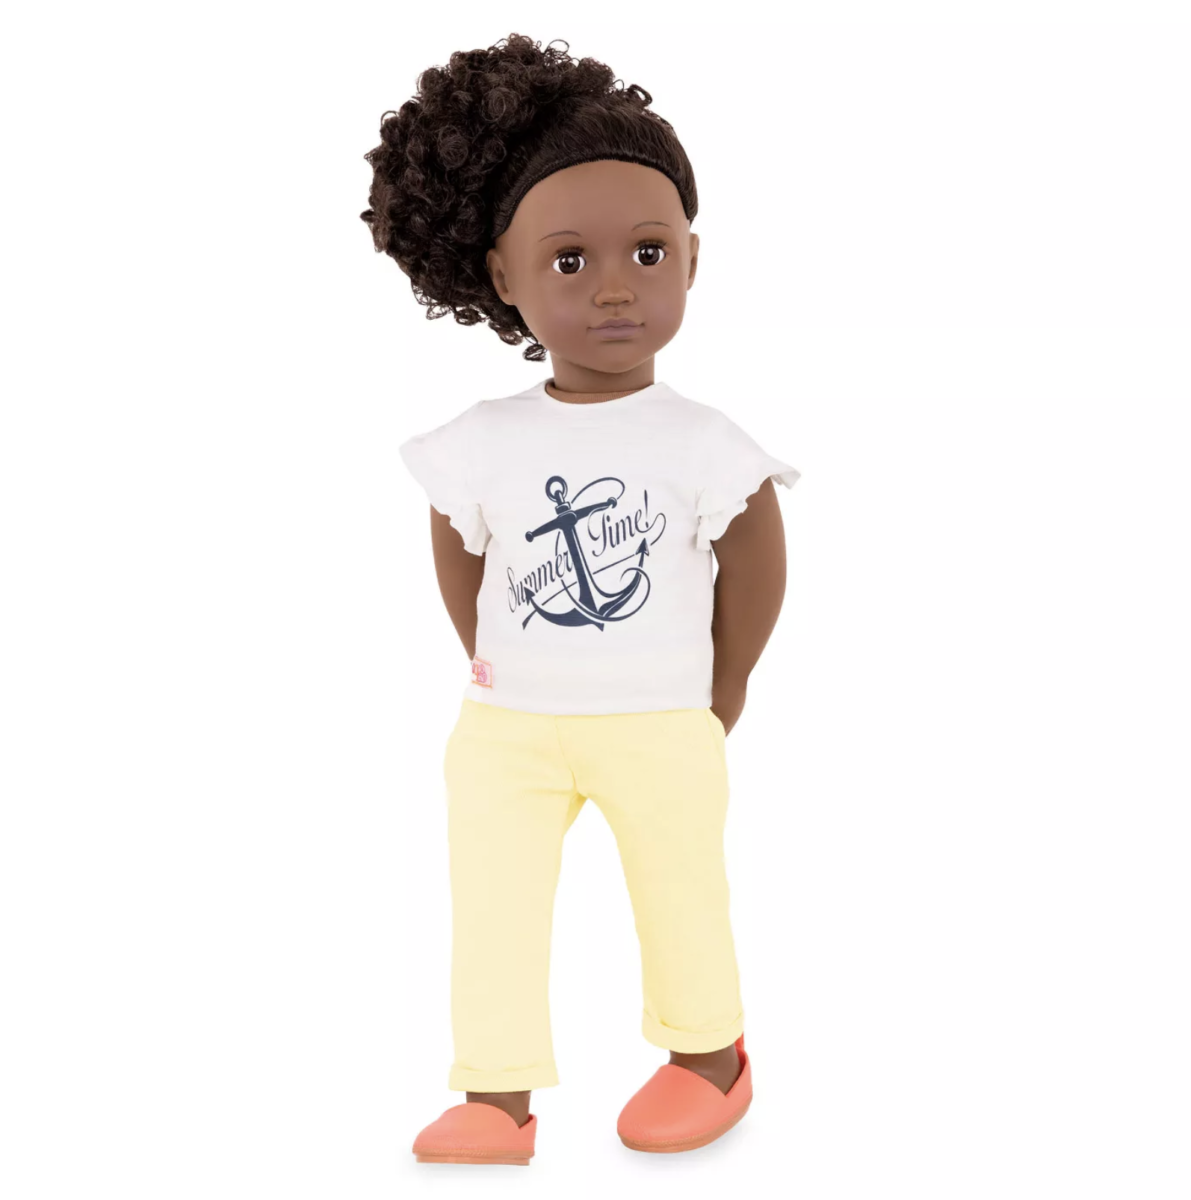 black baby dolls with natural hair